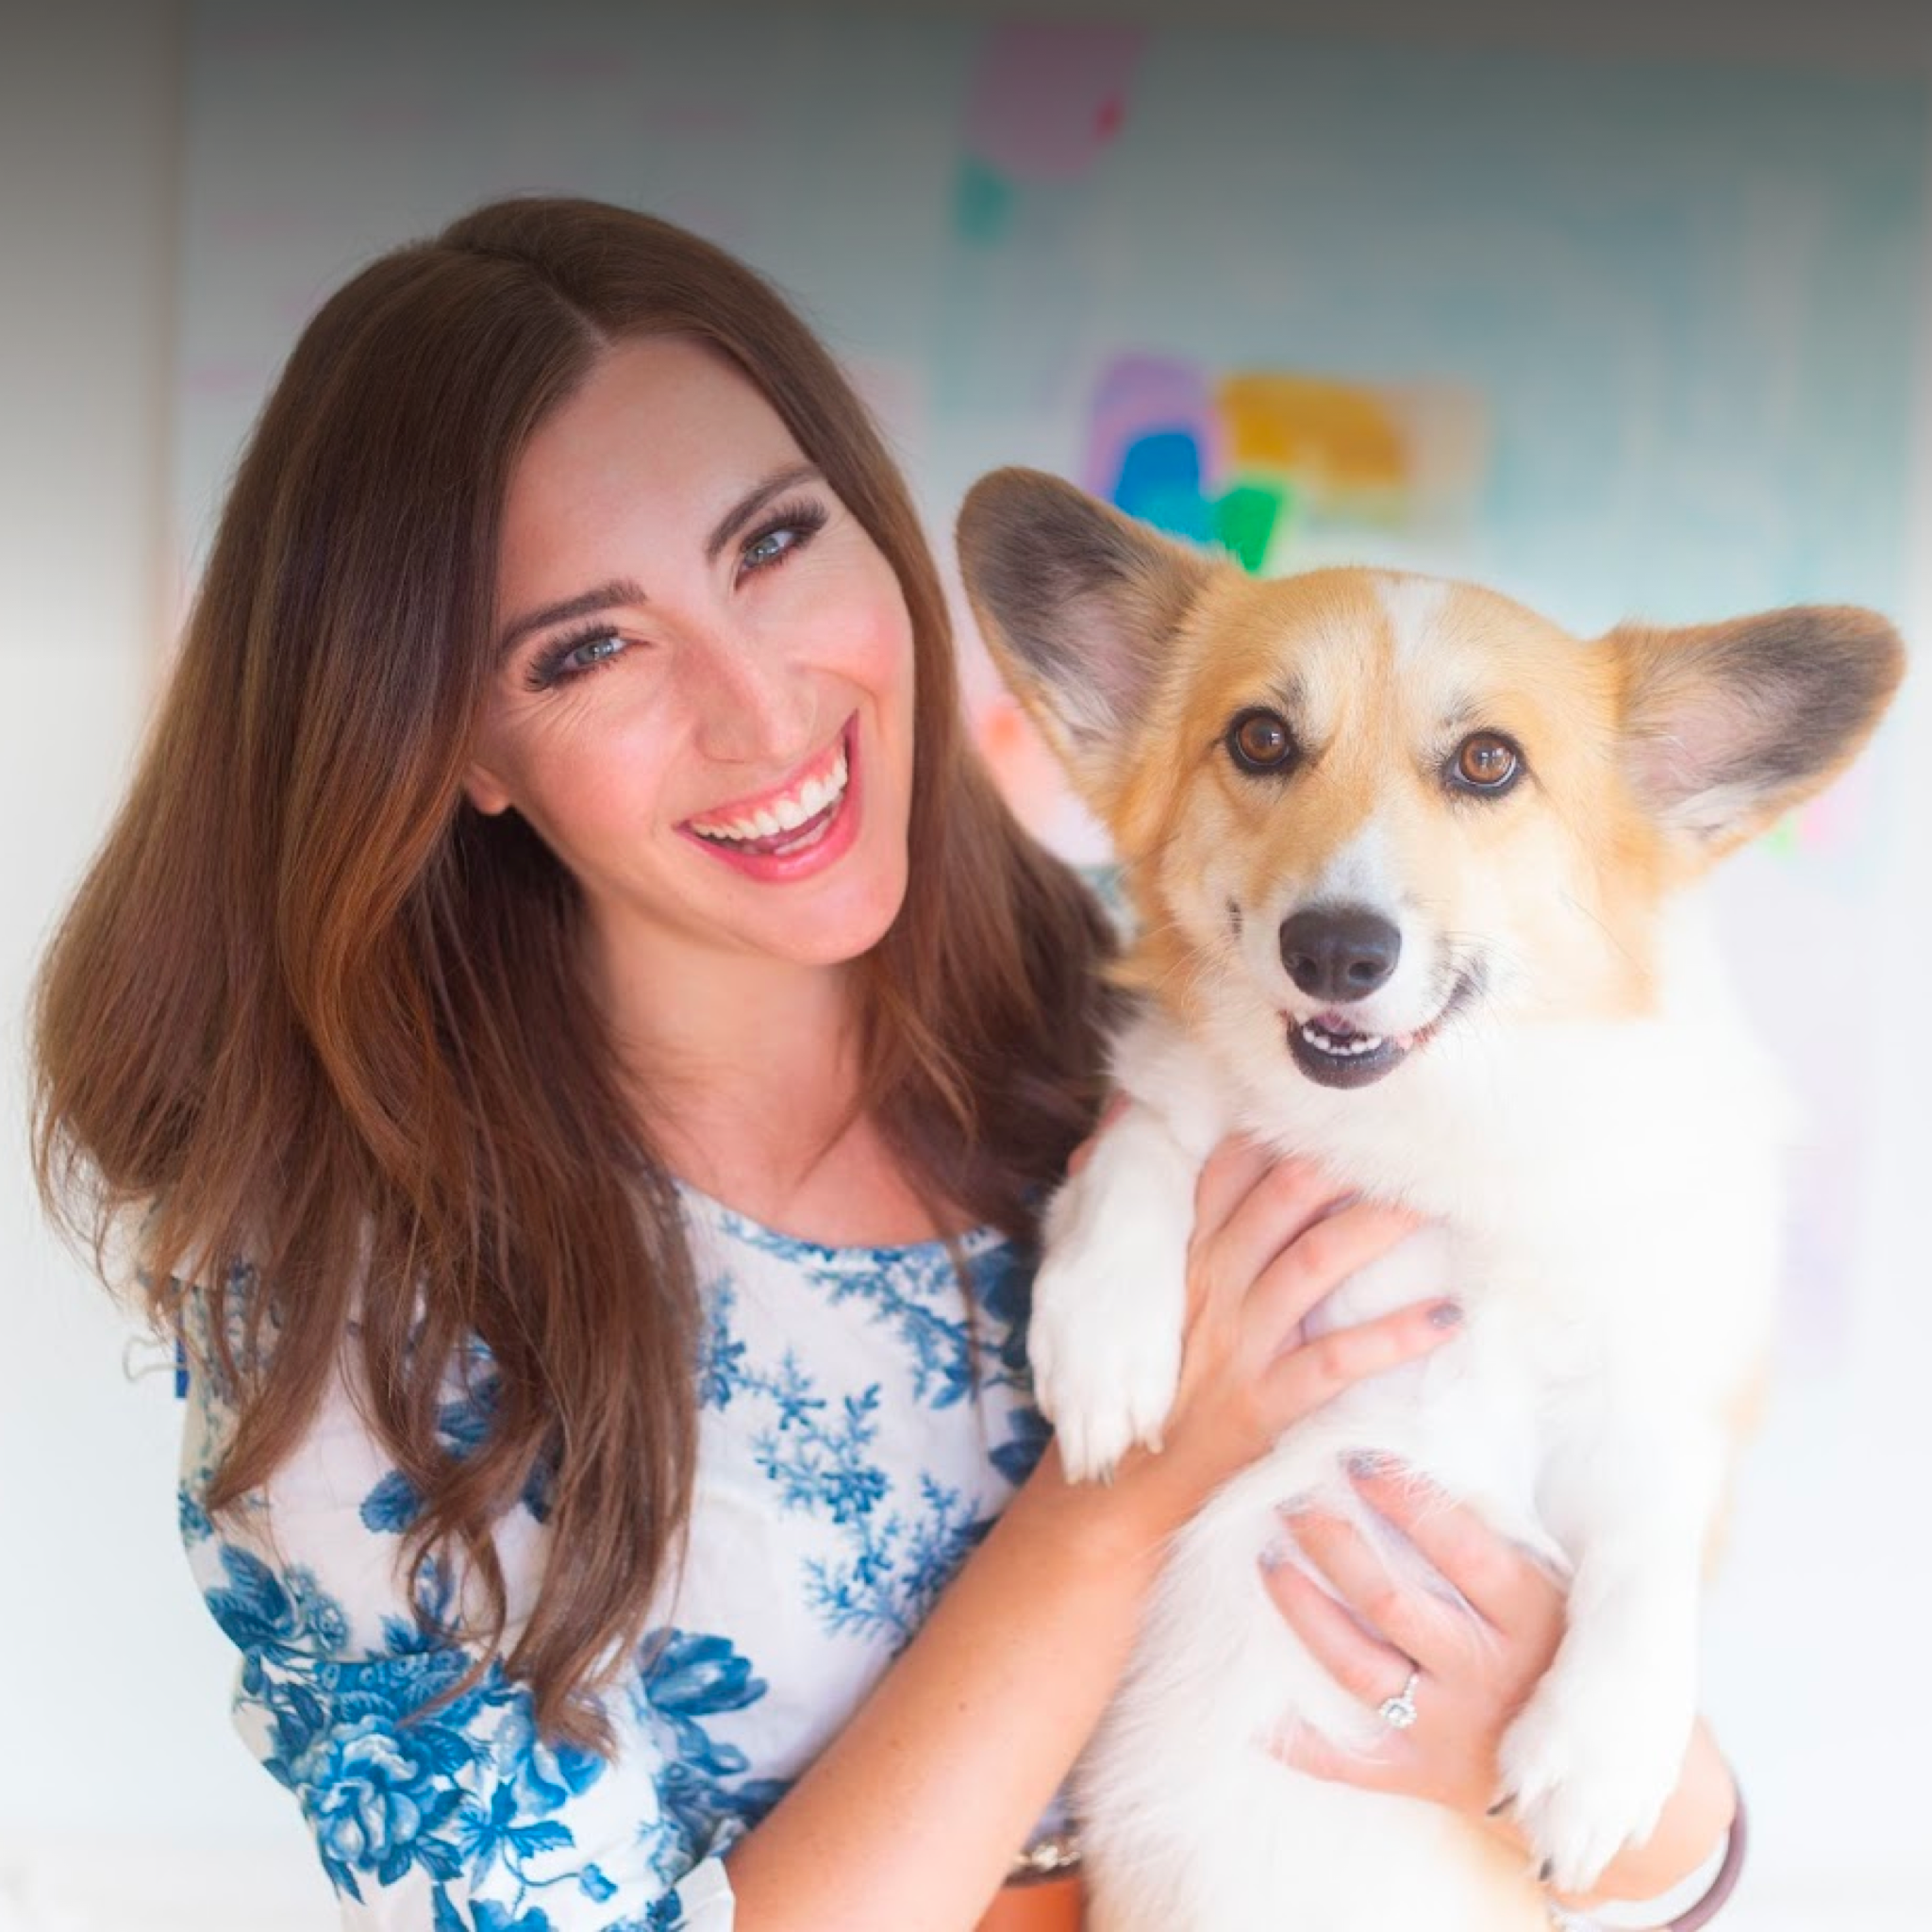 A smiling young woman poses with a corgi in her arms